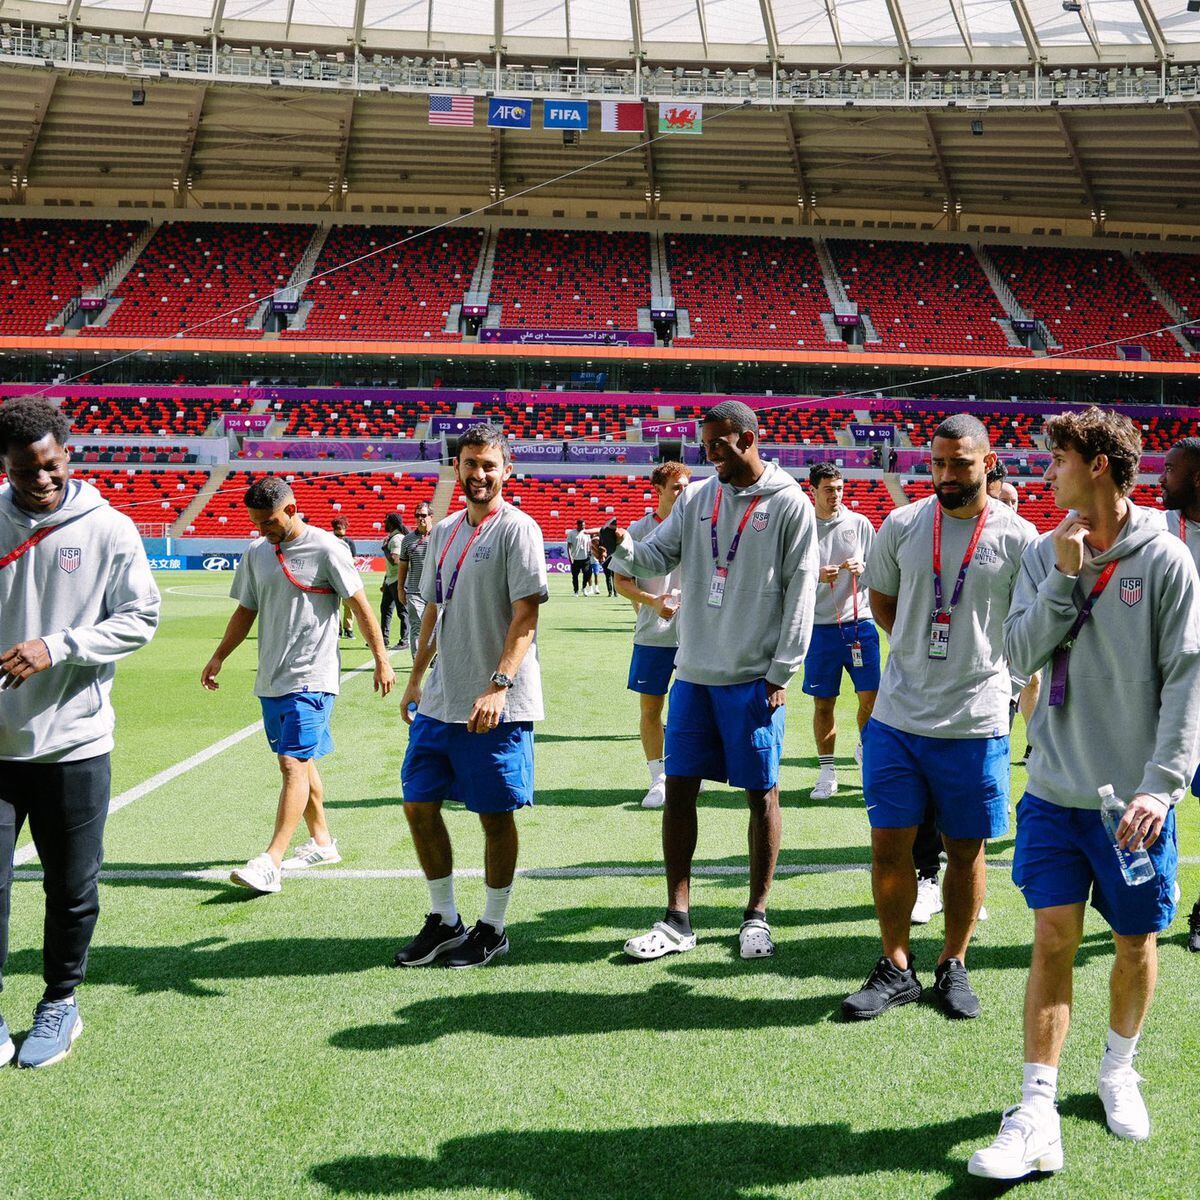 USMNT plays Wales to 1-1 draw in FIFA World Cup opener - SoccerWire